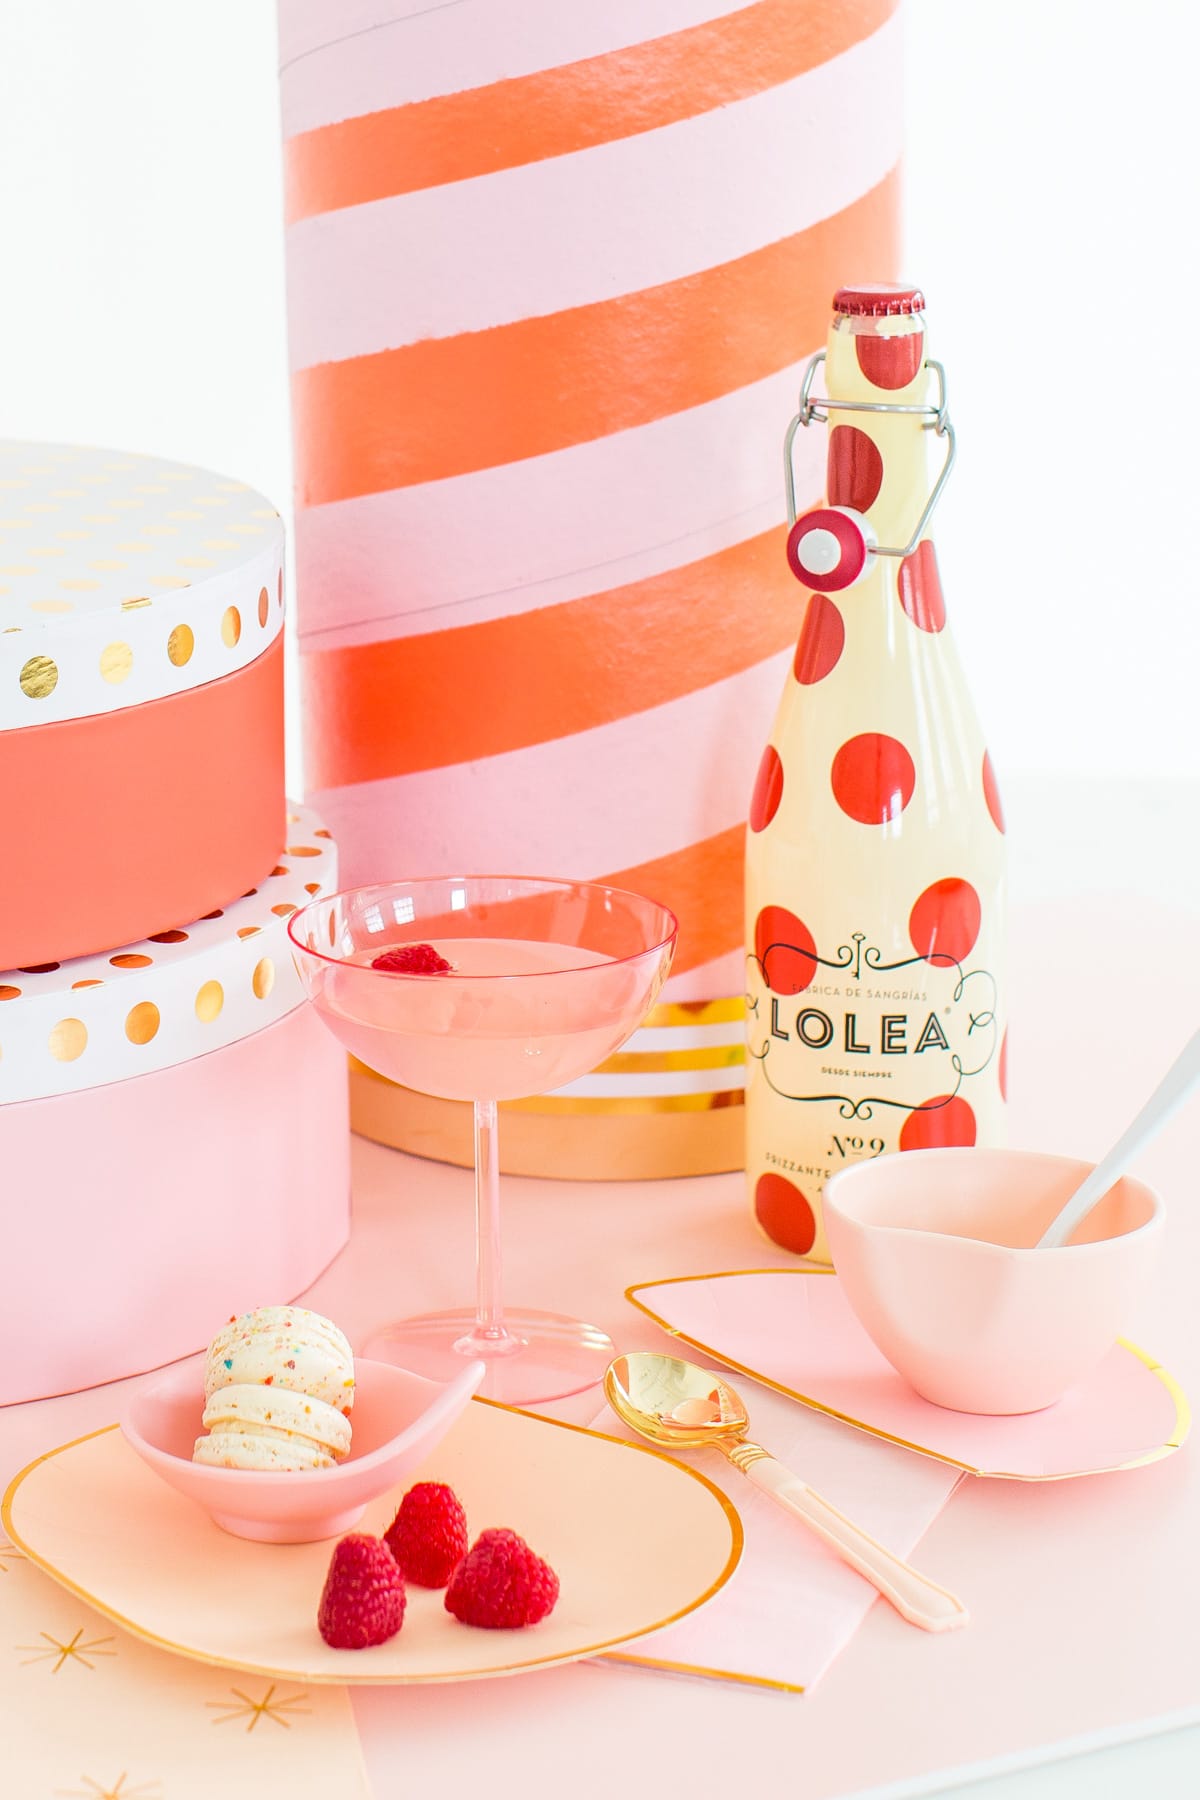 Shop Our Products: Ahhhh! So Excited to Introduce Our New Sugar & Cloth Entertaining & Parties Product Line!!! by top Houston lifestyle blogger Ashley Rose of Sugar and Cloth